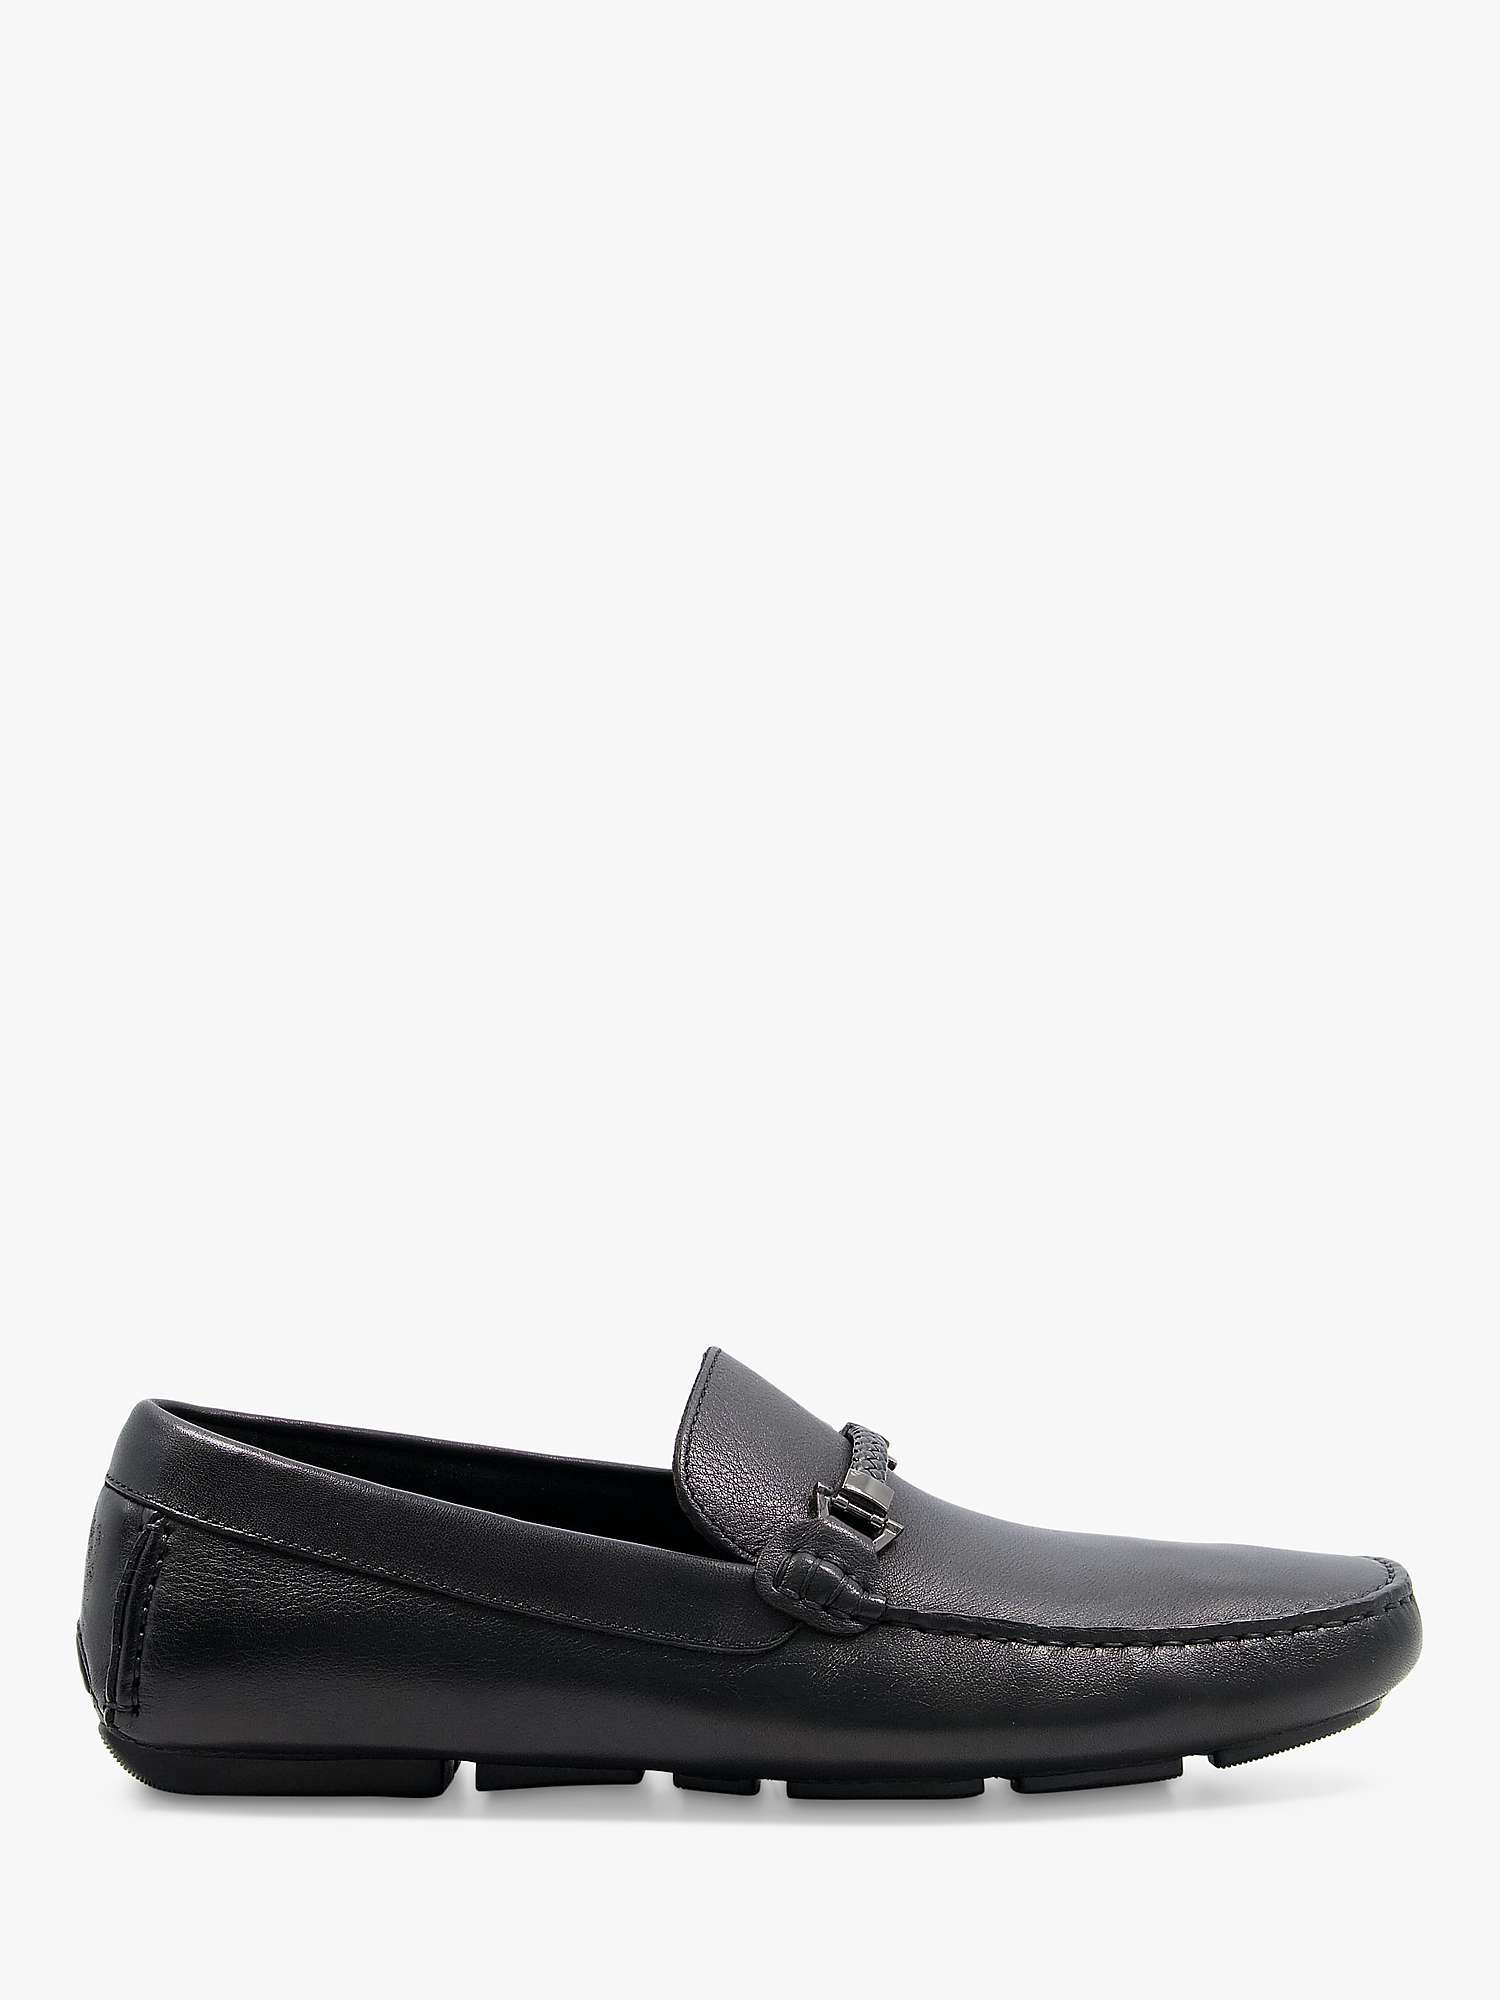 Buy Dune Wide Fit Woven Trim Driver Beacons Loafers Online at johnlewis.com